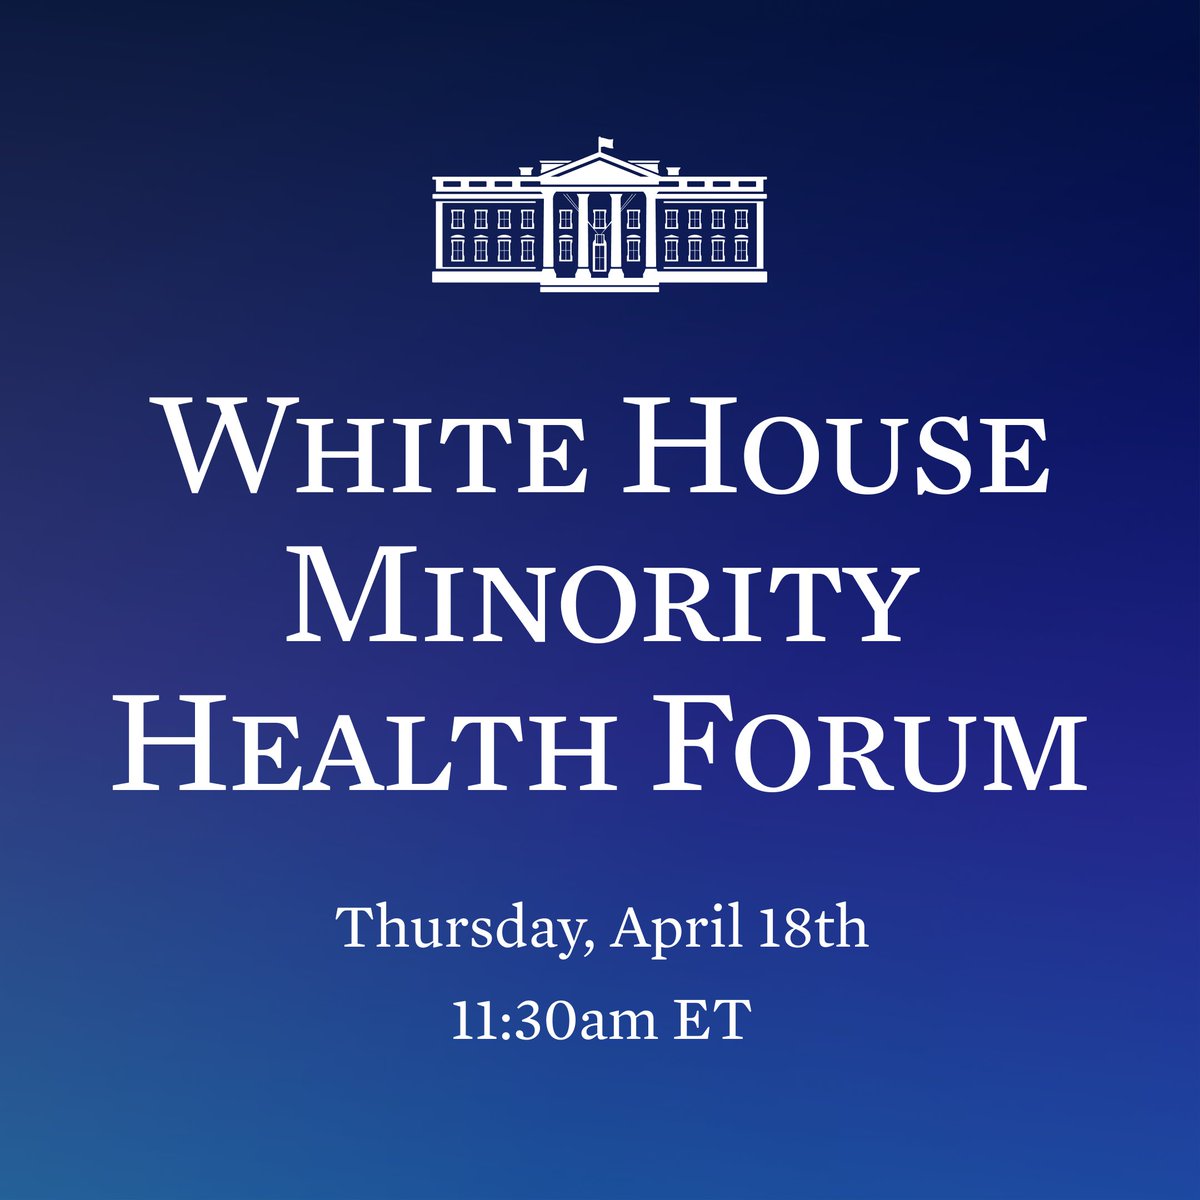 @AmericanCancer @rlsiegel25 heads to the White House tomorrow to highlight the epidemic of #colorectalcancer among Alaska Native people at the Minority Health Forum. @ACS_Research #ccsm